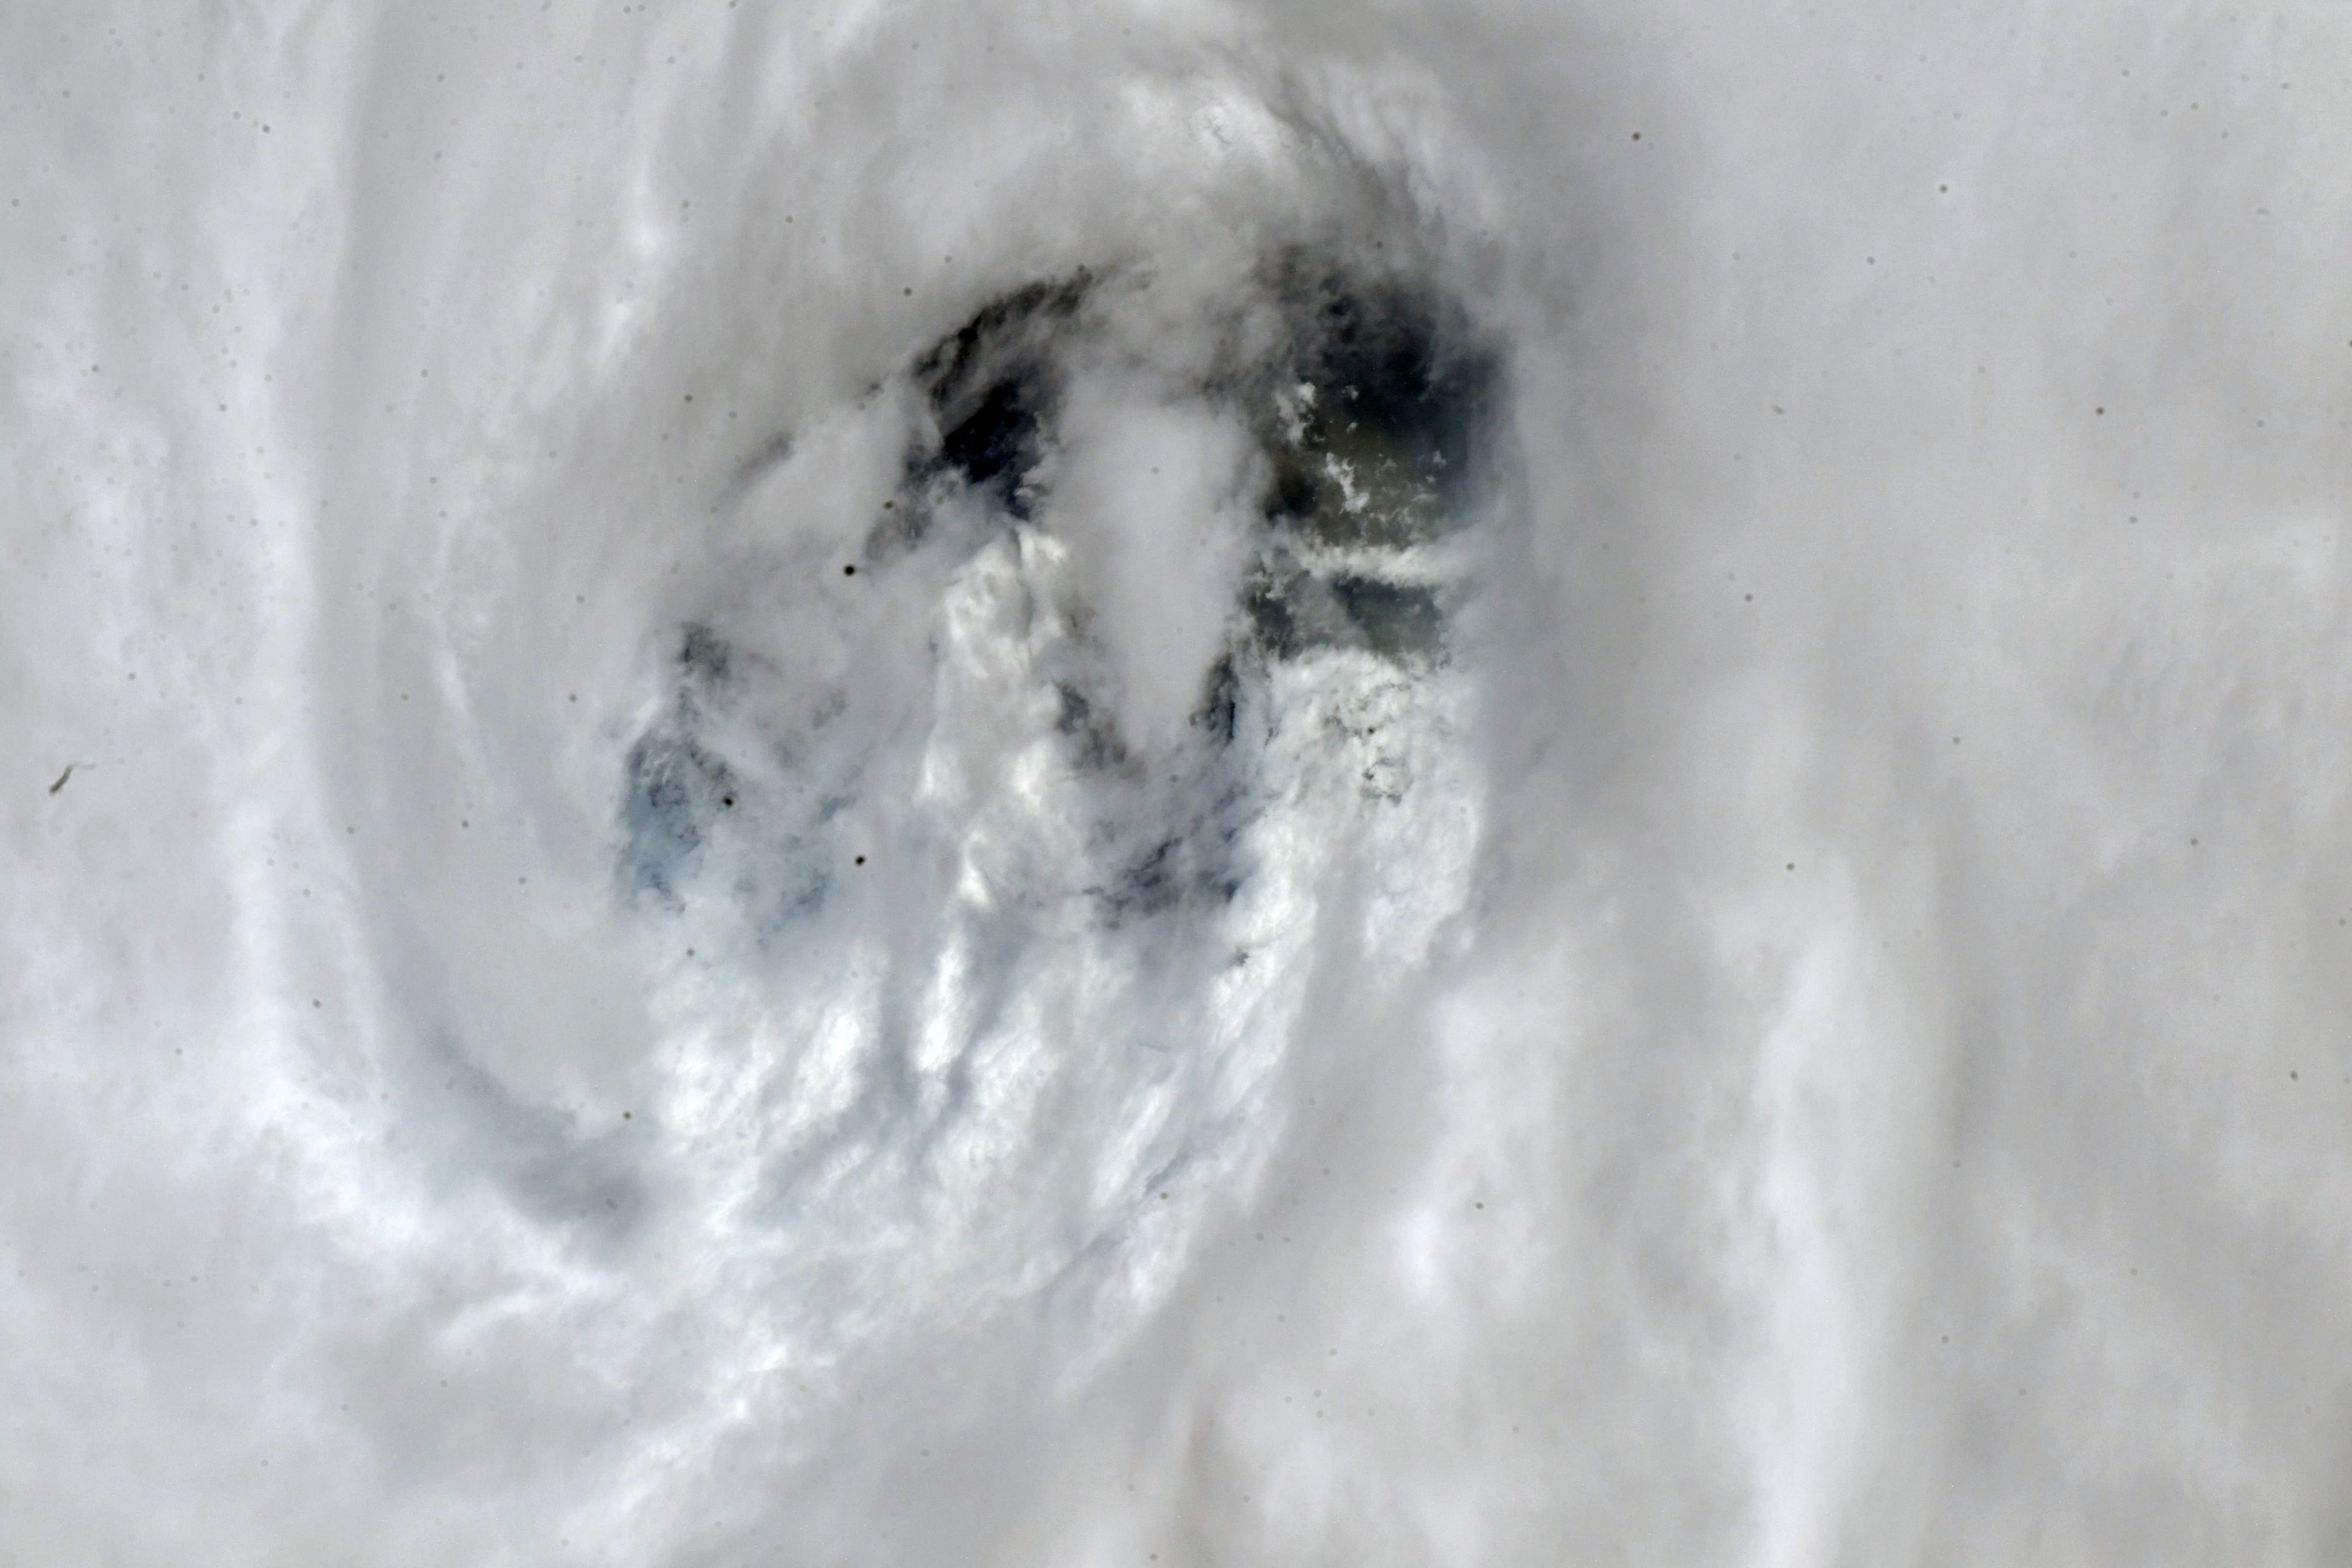 NASA astronaut Bob Hines posted on Twitter this photo of the eye of Hurricane Ian on Sept. 28, 2022.